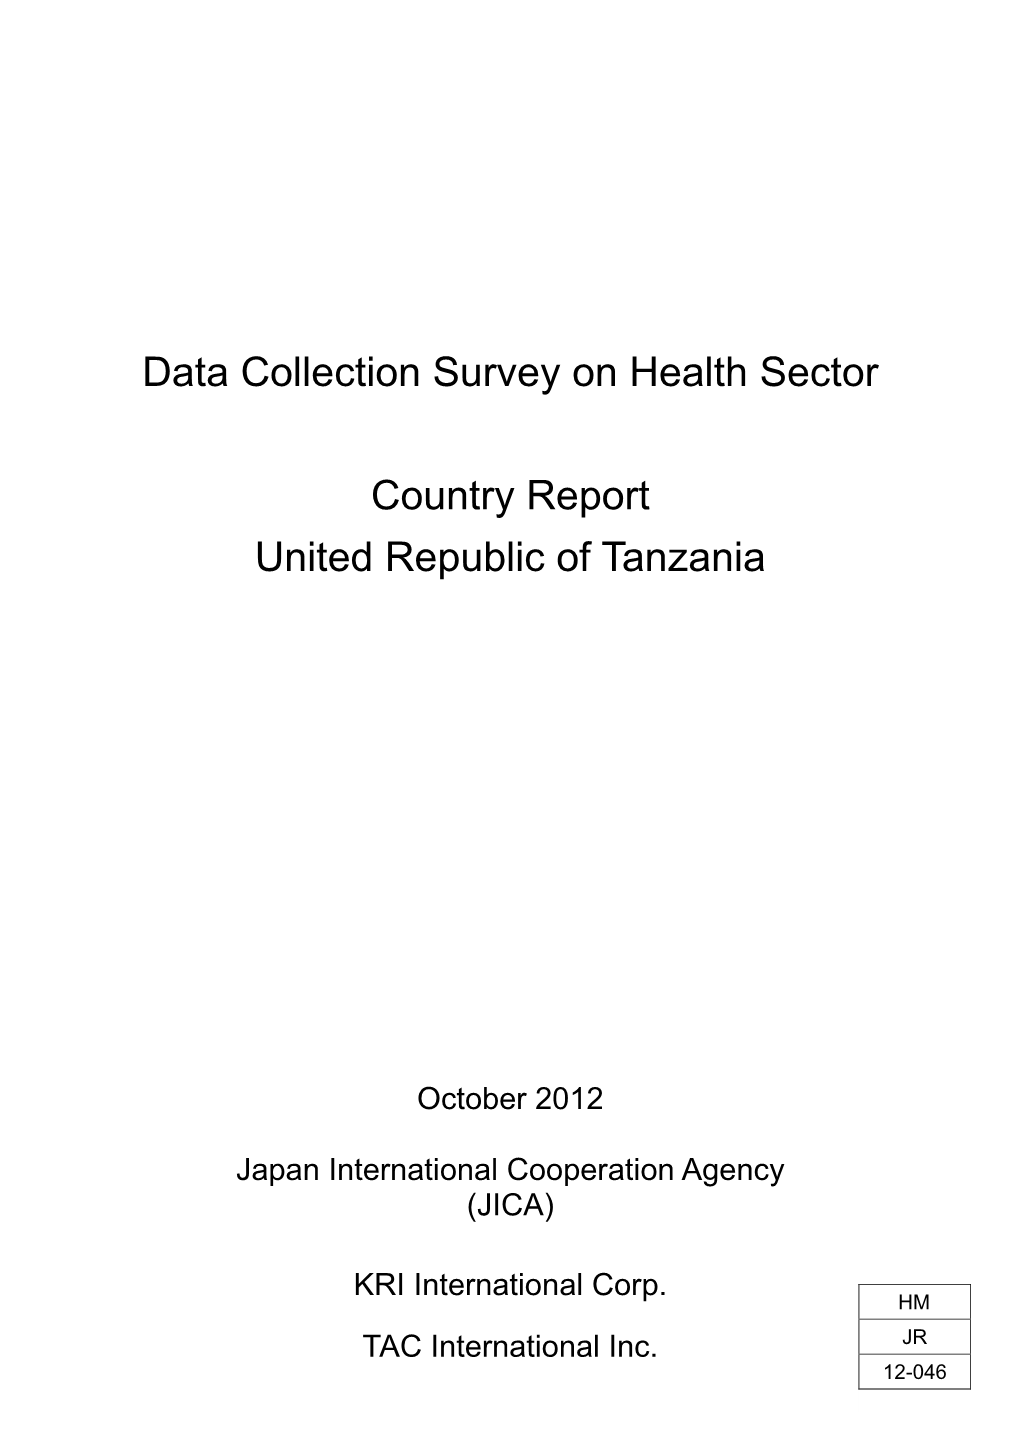 Data Collection Survey on Health Sector Country Report United Republic of Tanzania Table of Contents